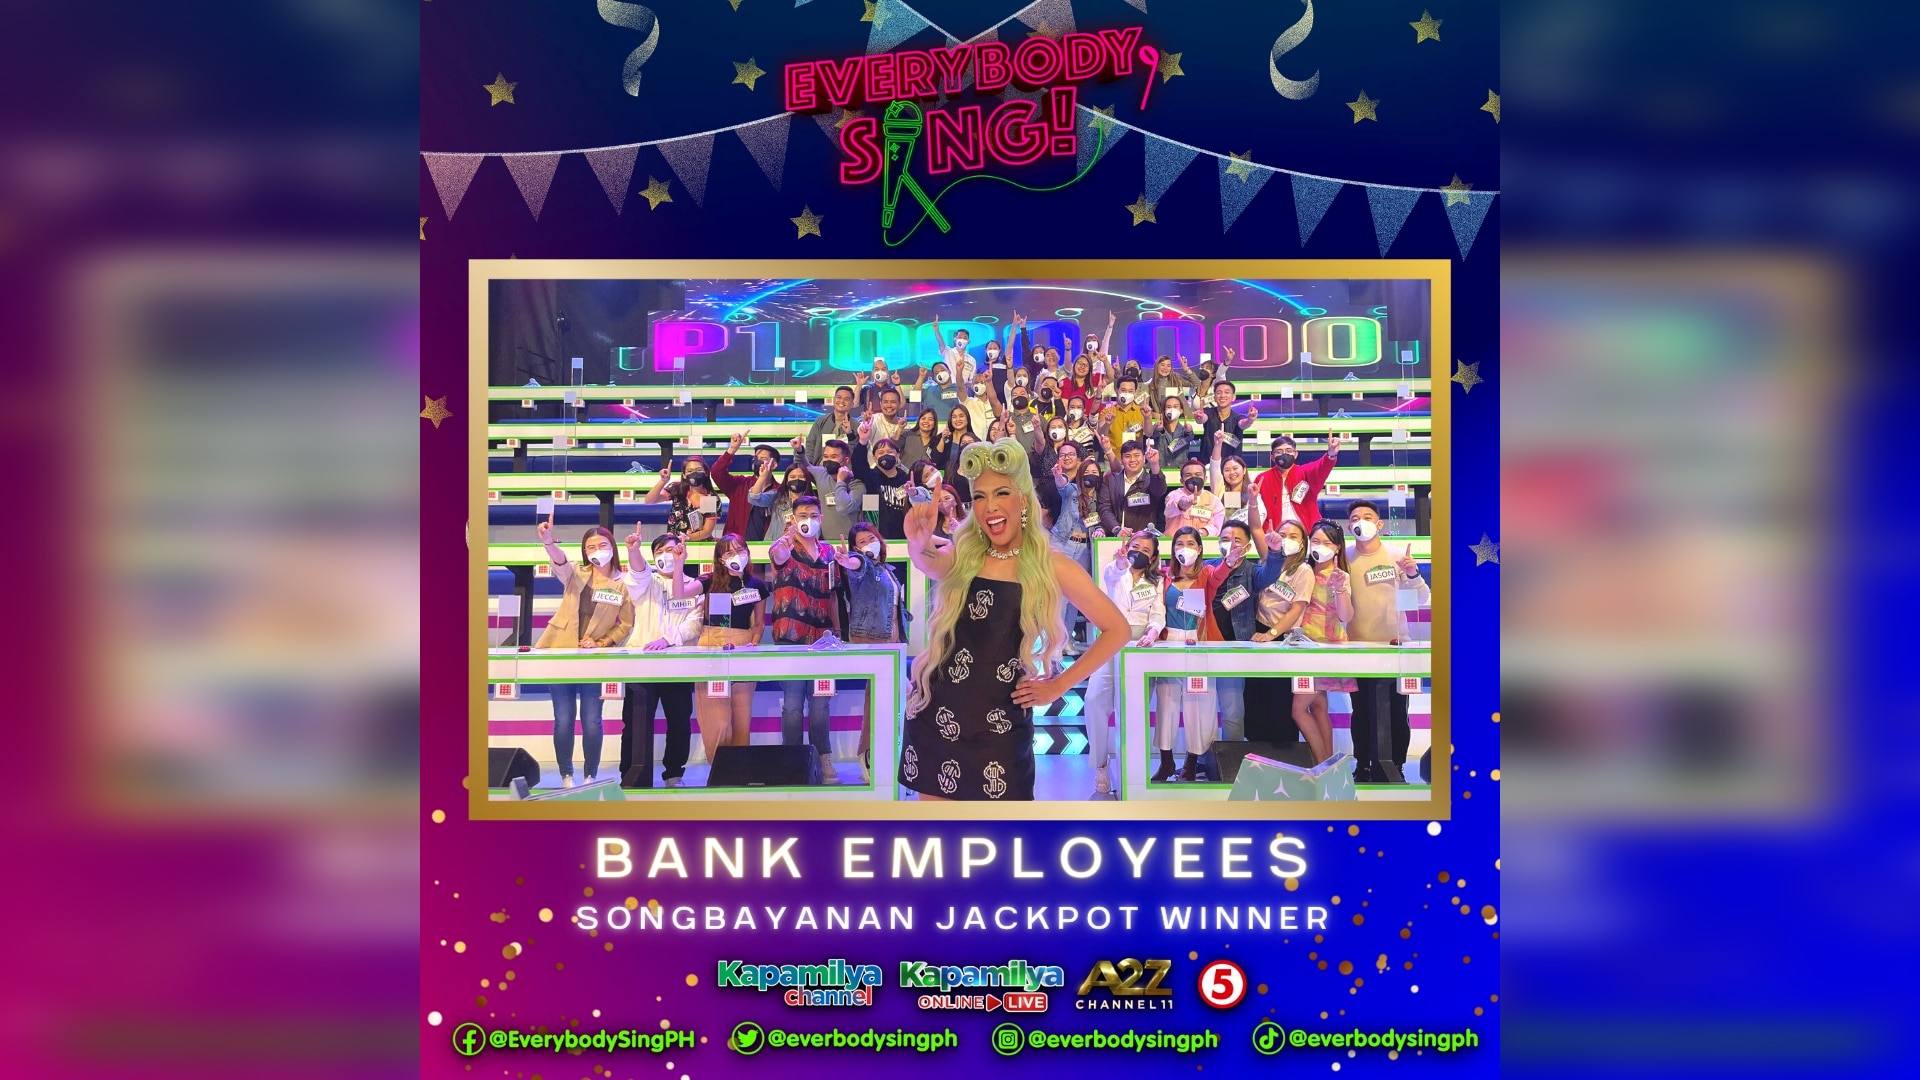 Bank employees take home P1 million jackpot in "Everybody, Sing!"